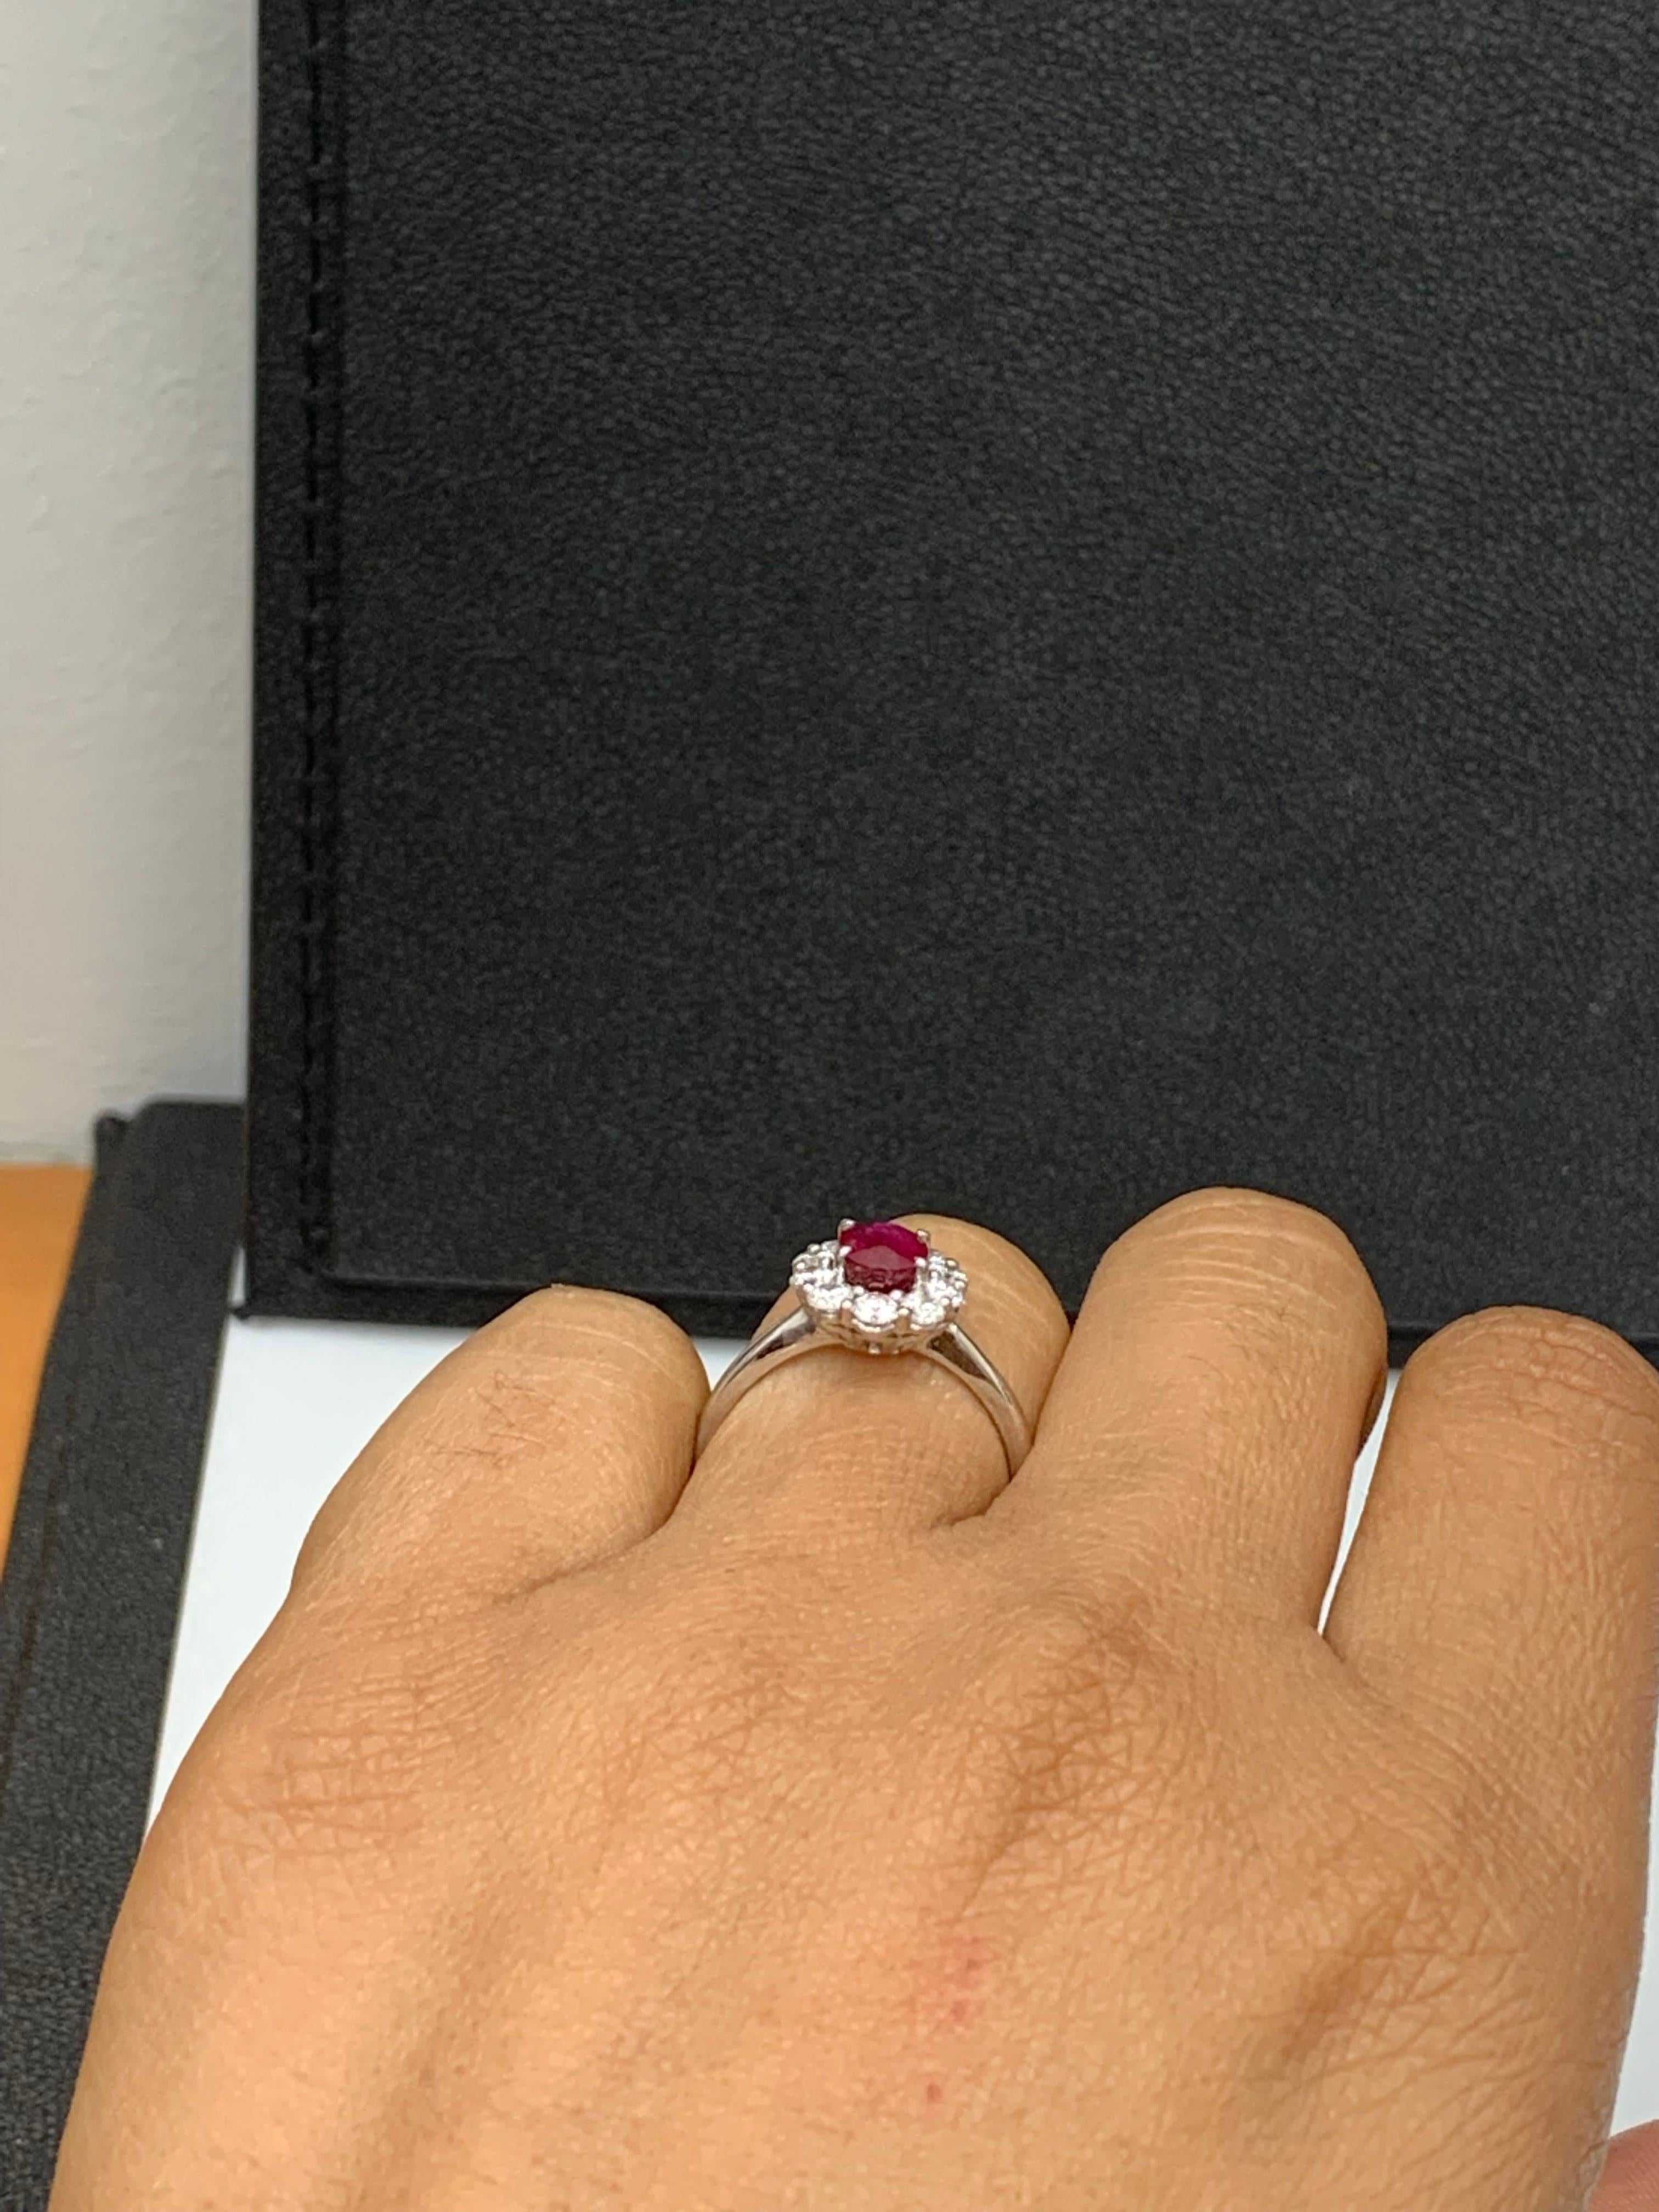 0.92 Carat Oval Cut Ruby and Diamond Ring in 18k White Gold For Sale 4